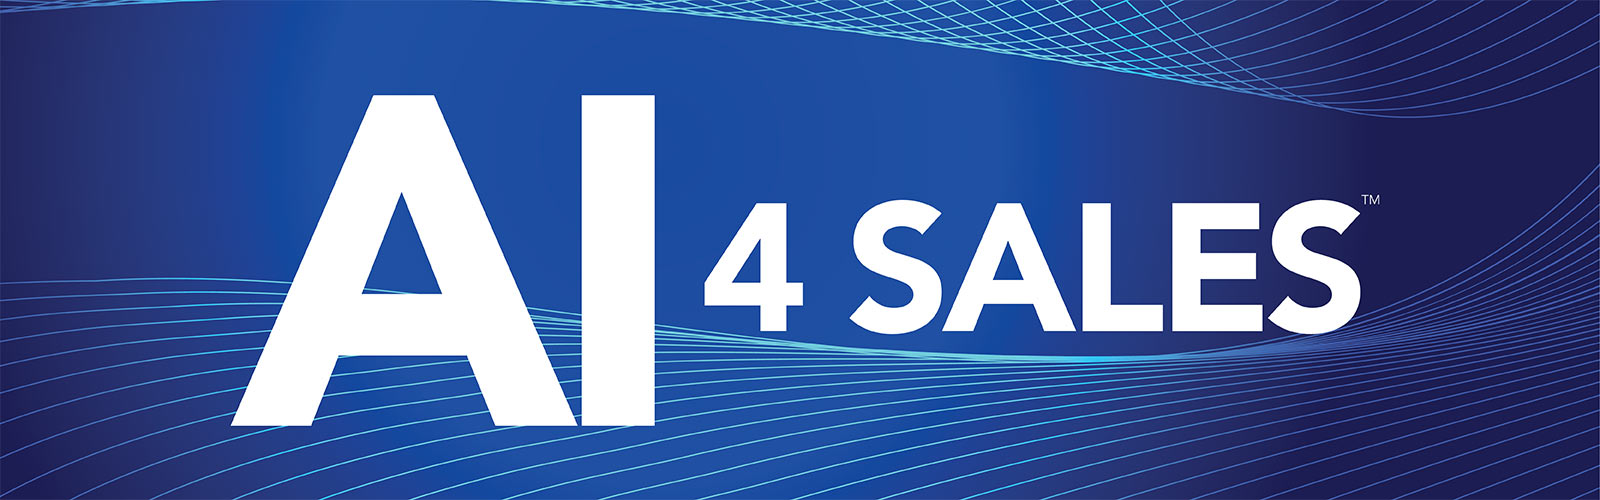 A blue technology-inspired background with AI 4 Sales in white